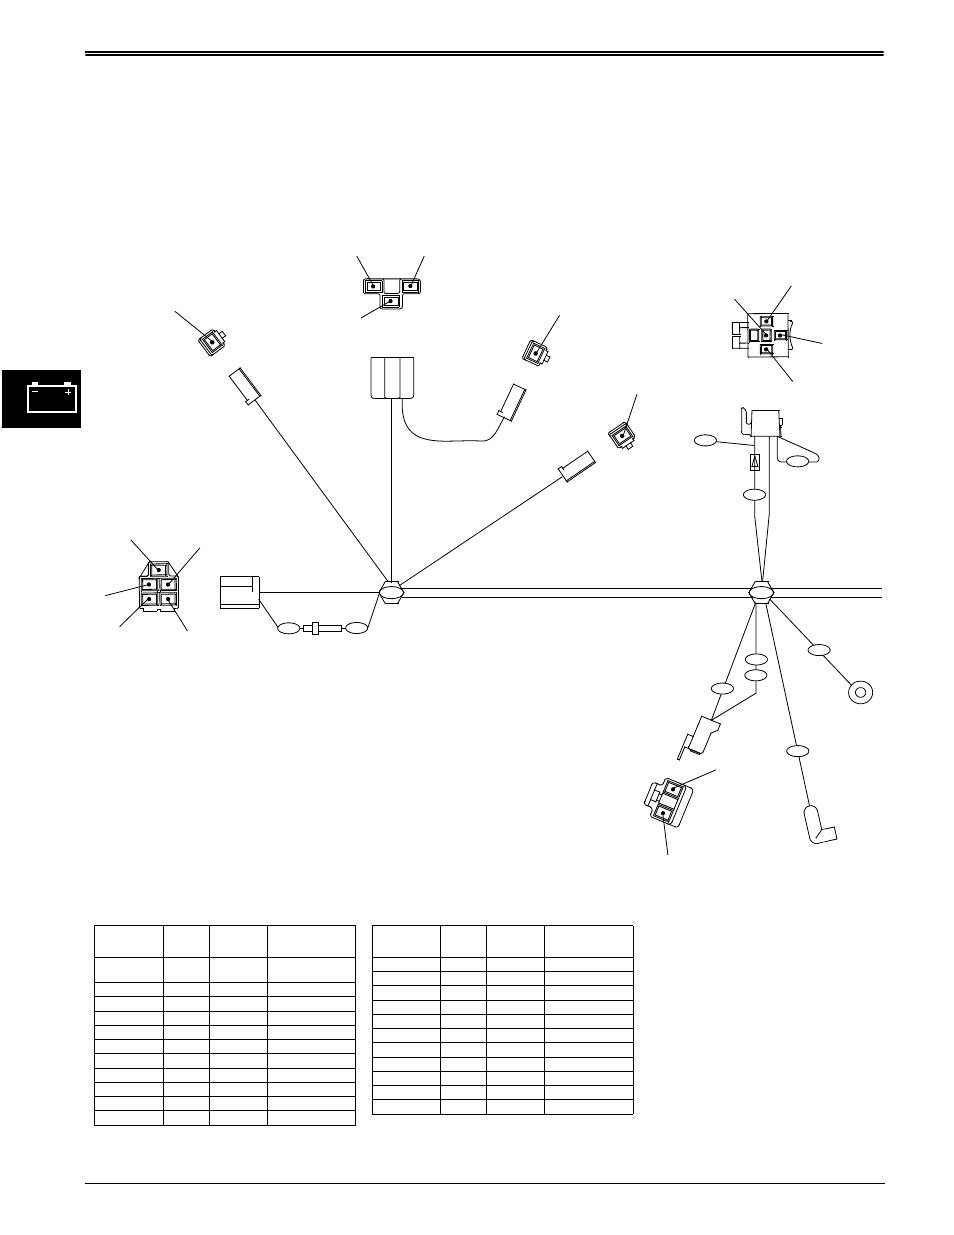 Wiring Harness Diagrams  Electrical